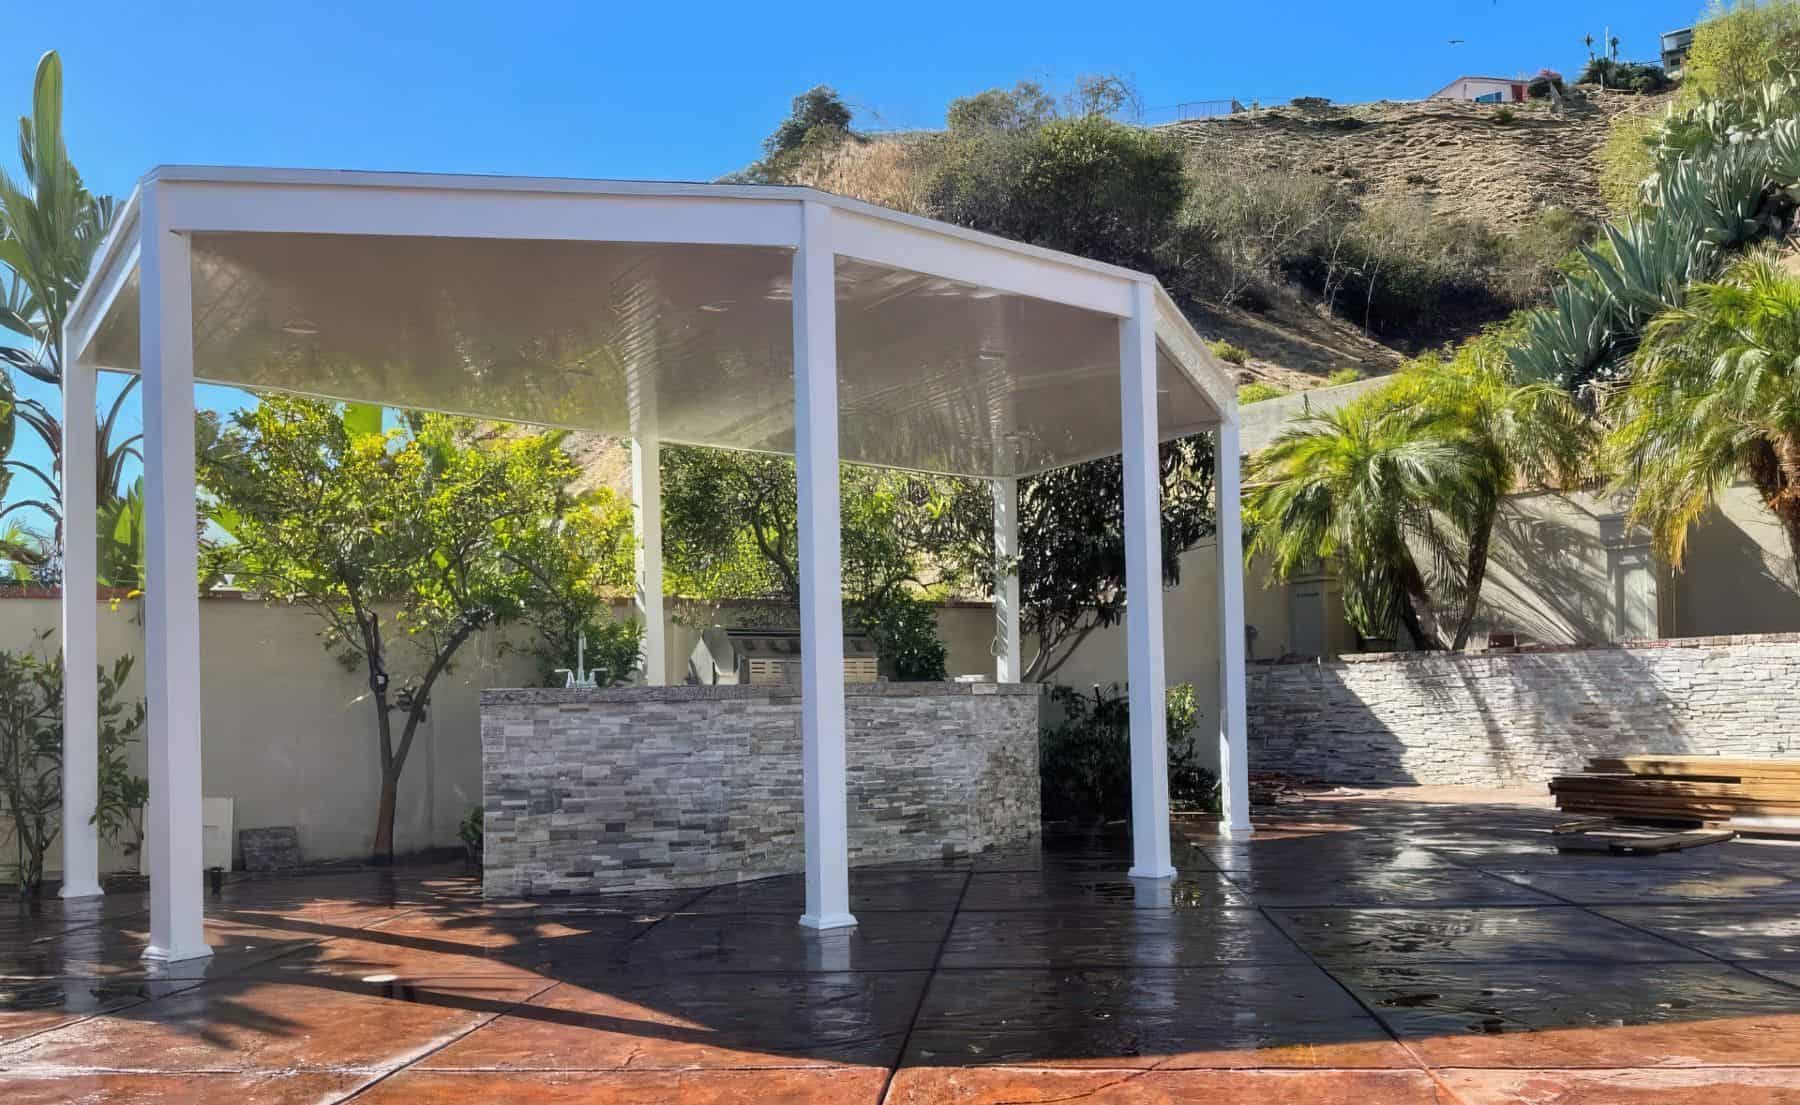 A vinyl solid patio cover in backyard escape surrounded by lush trees with a marble and granite kitchen top inside.